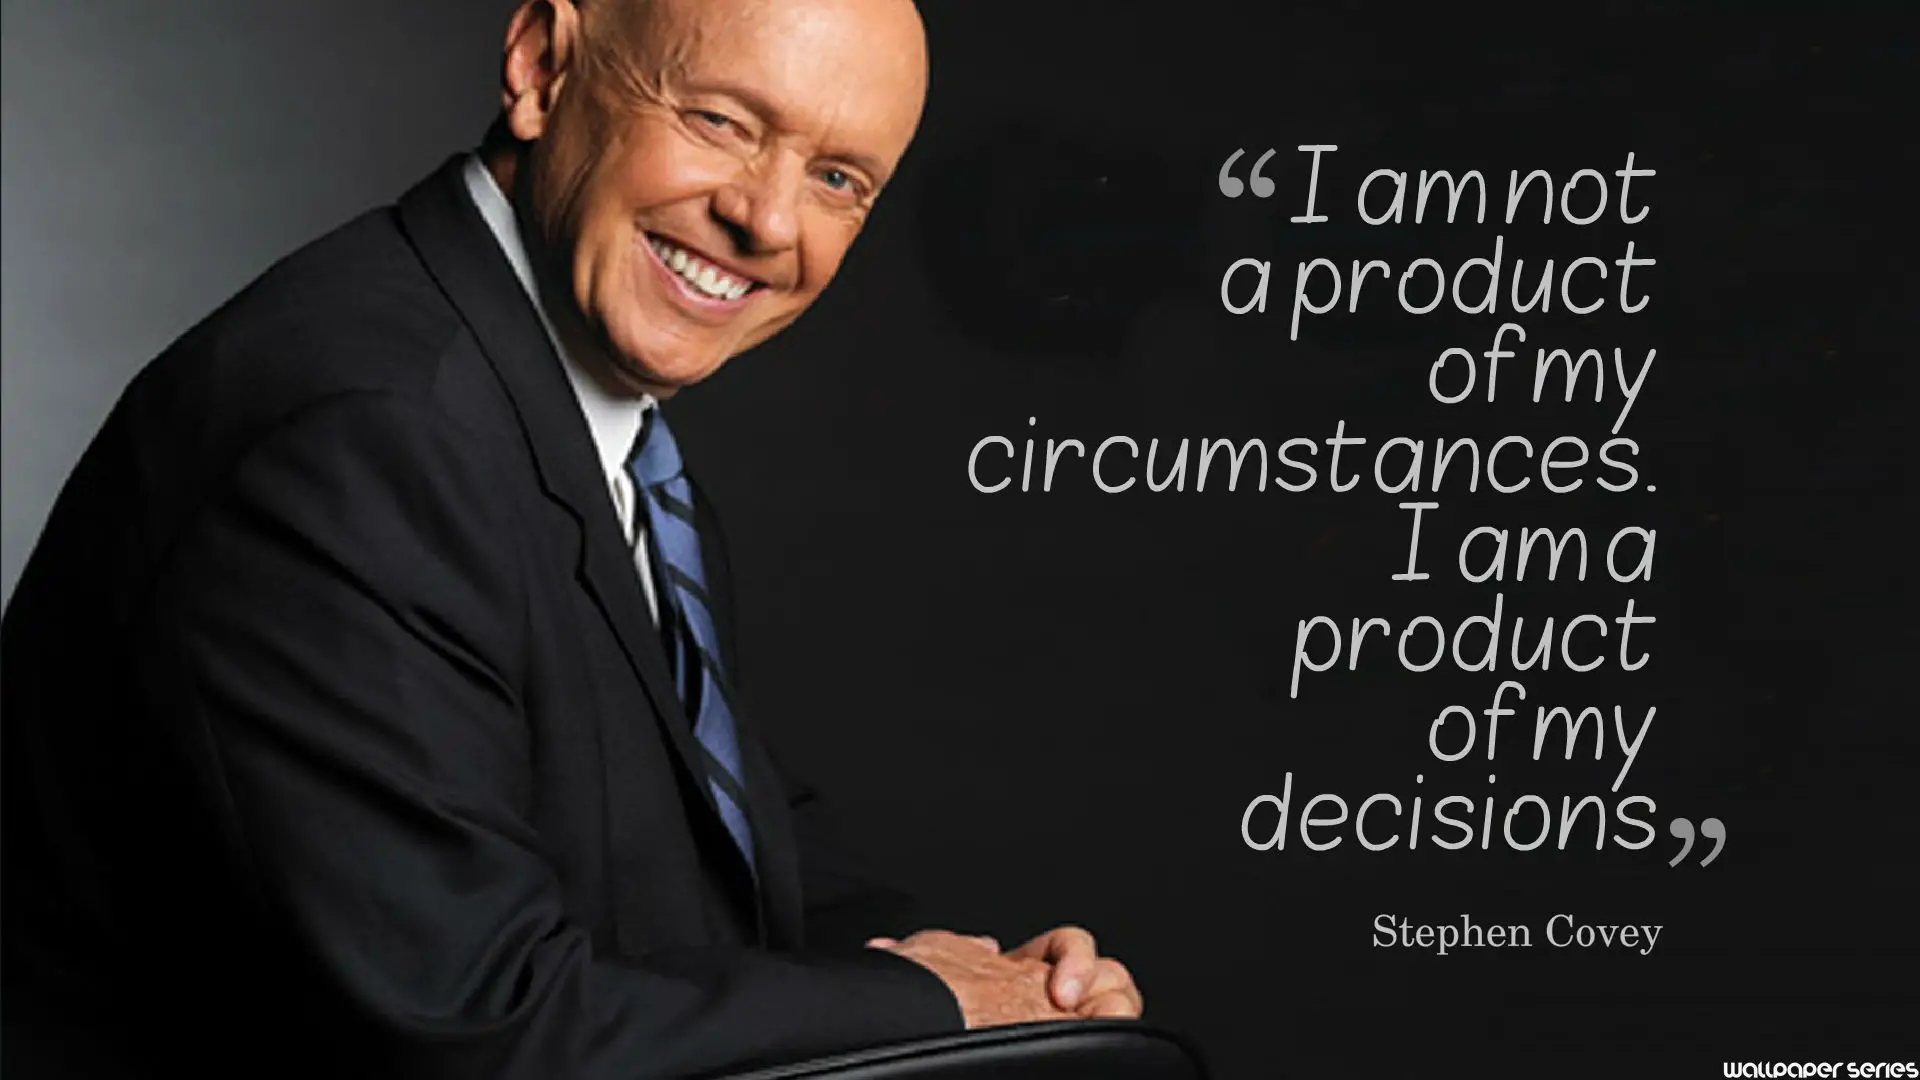 Stephen covey quotes